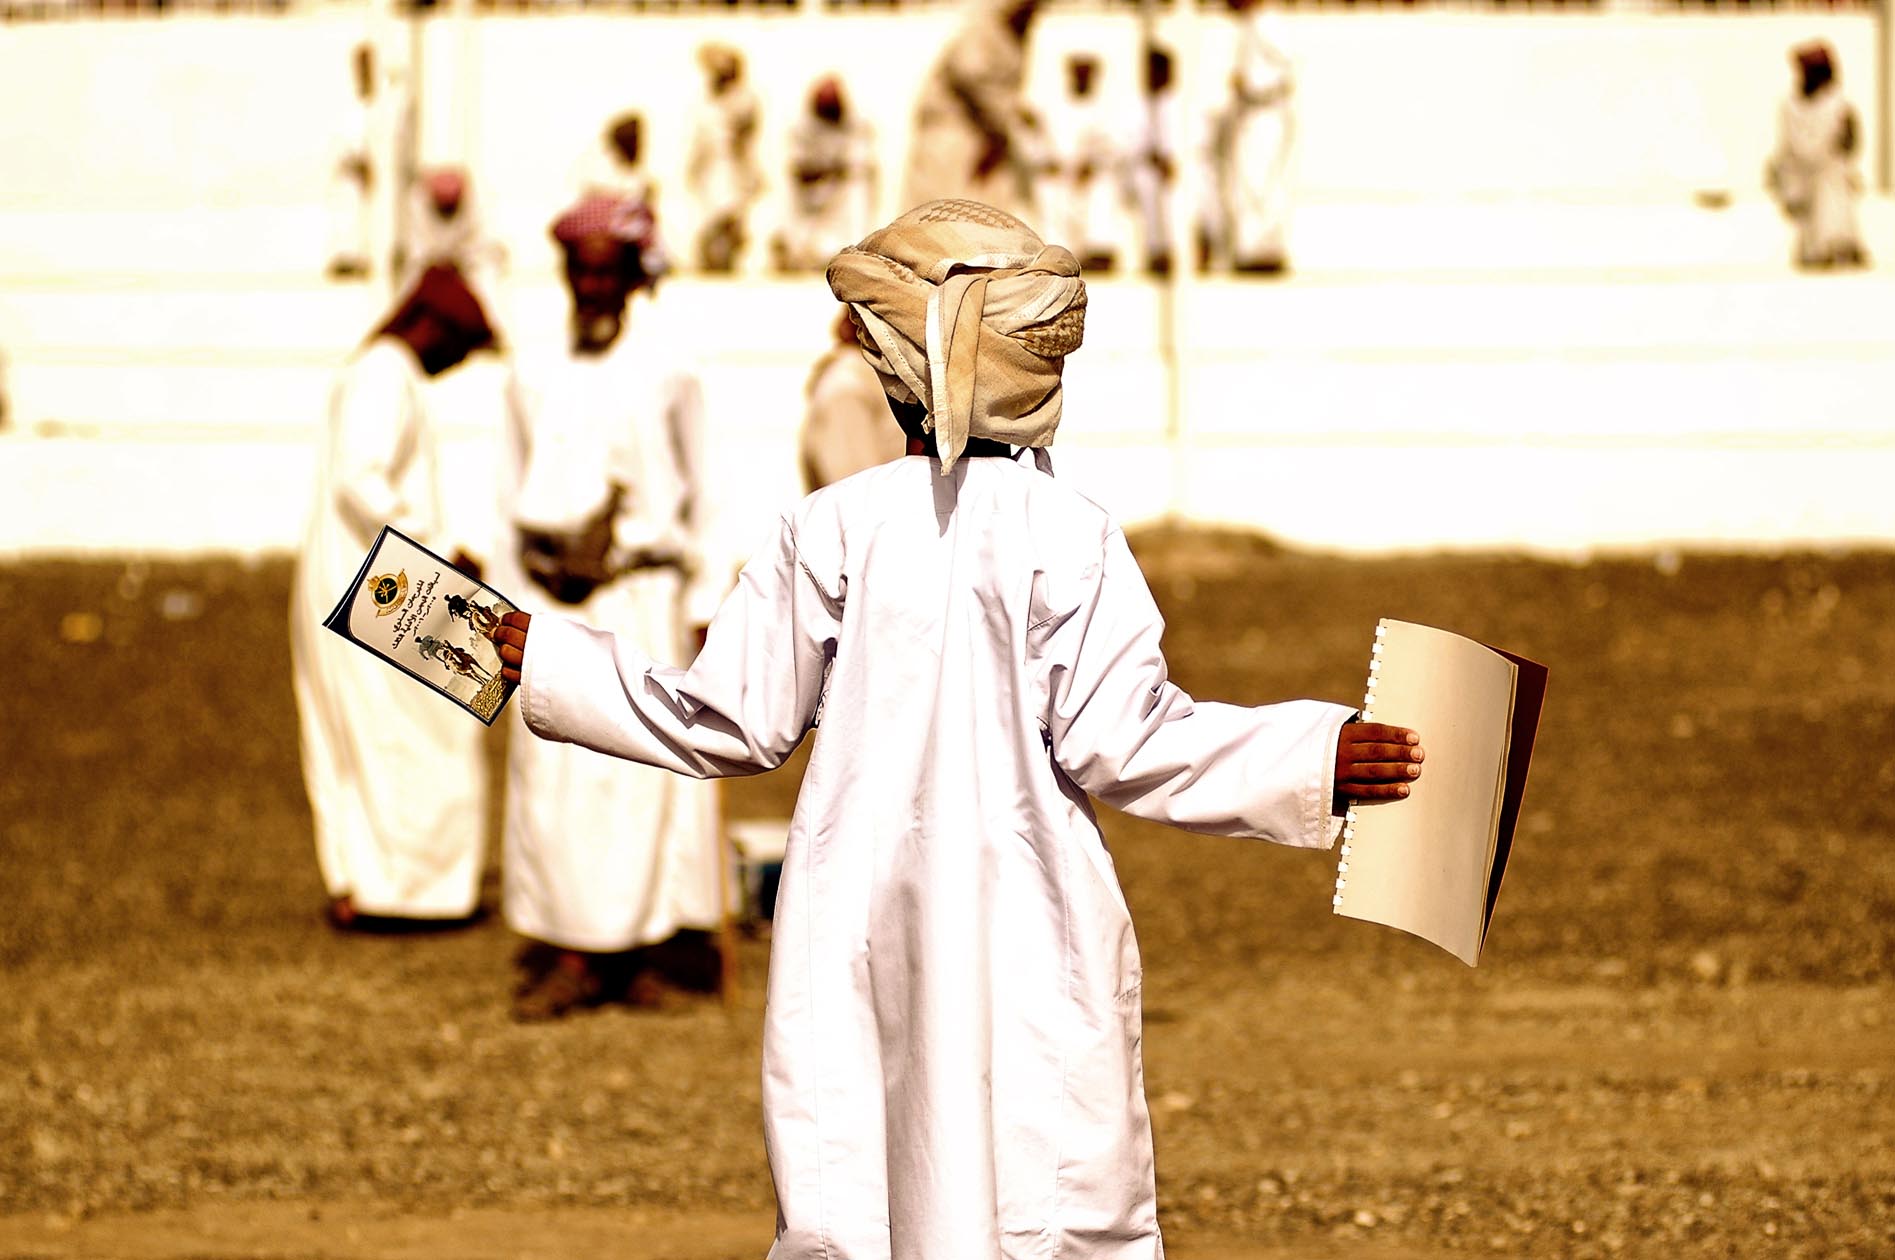 At the camel races